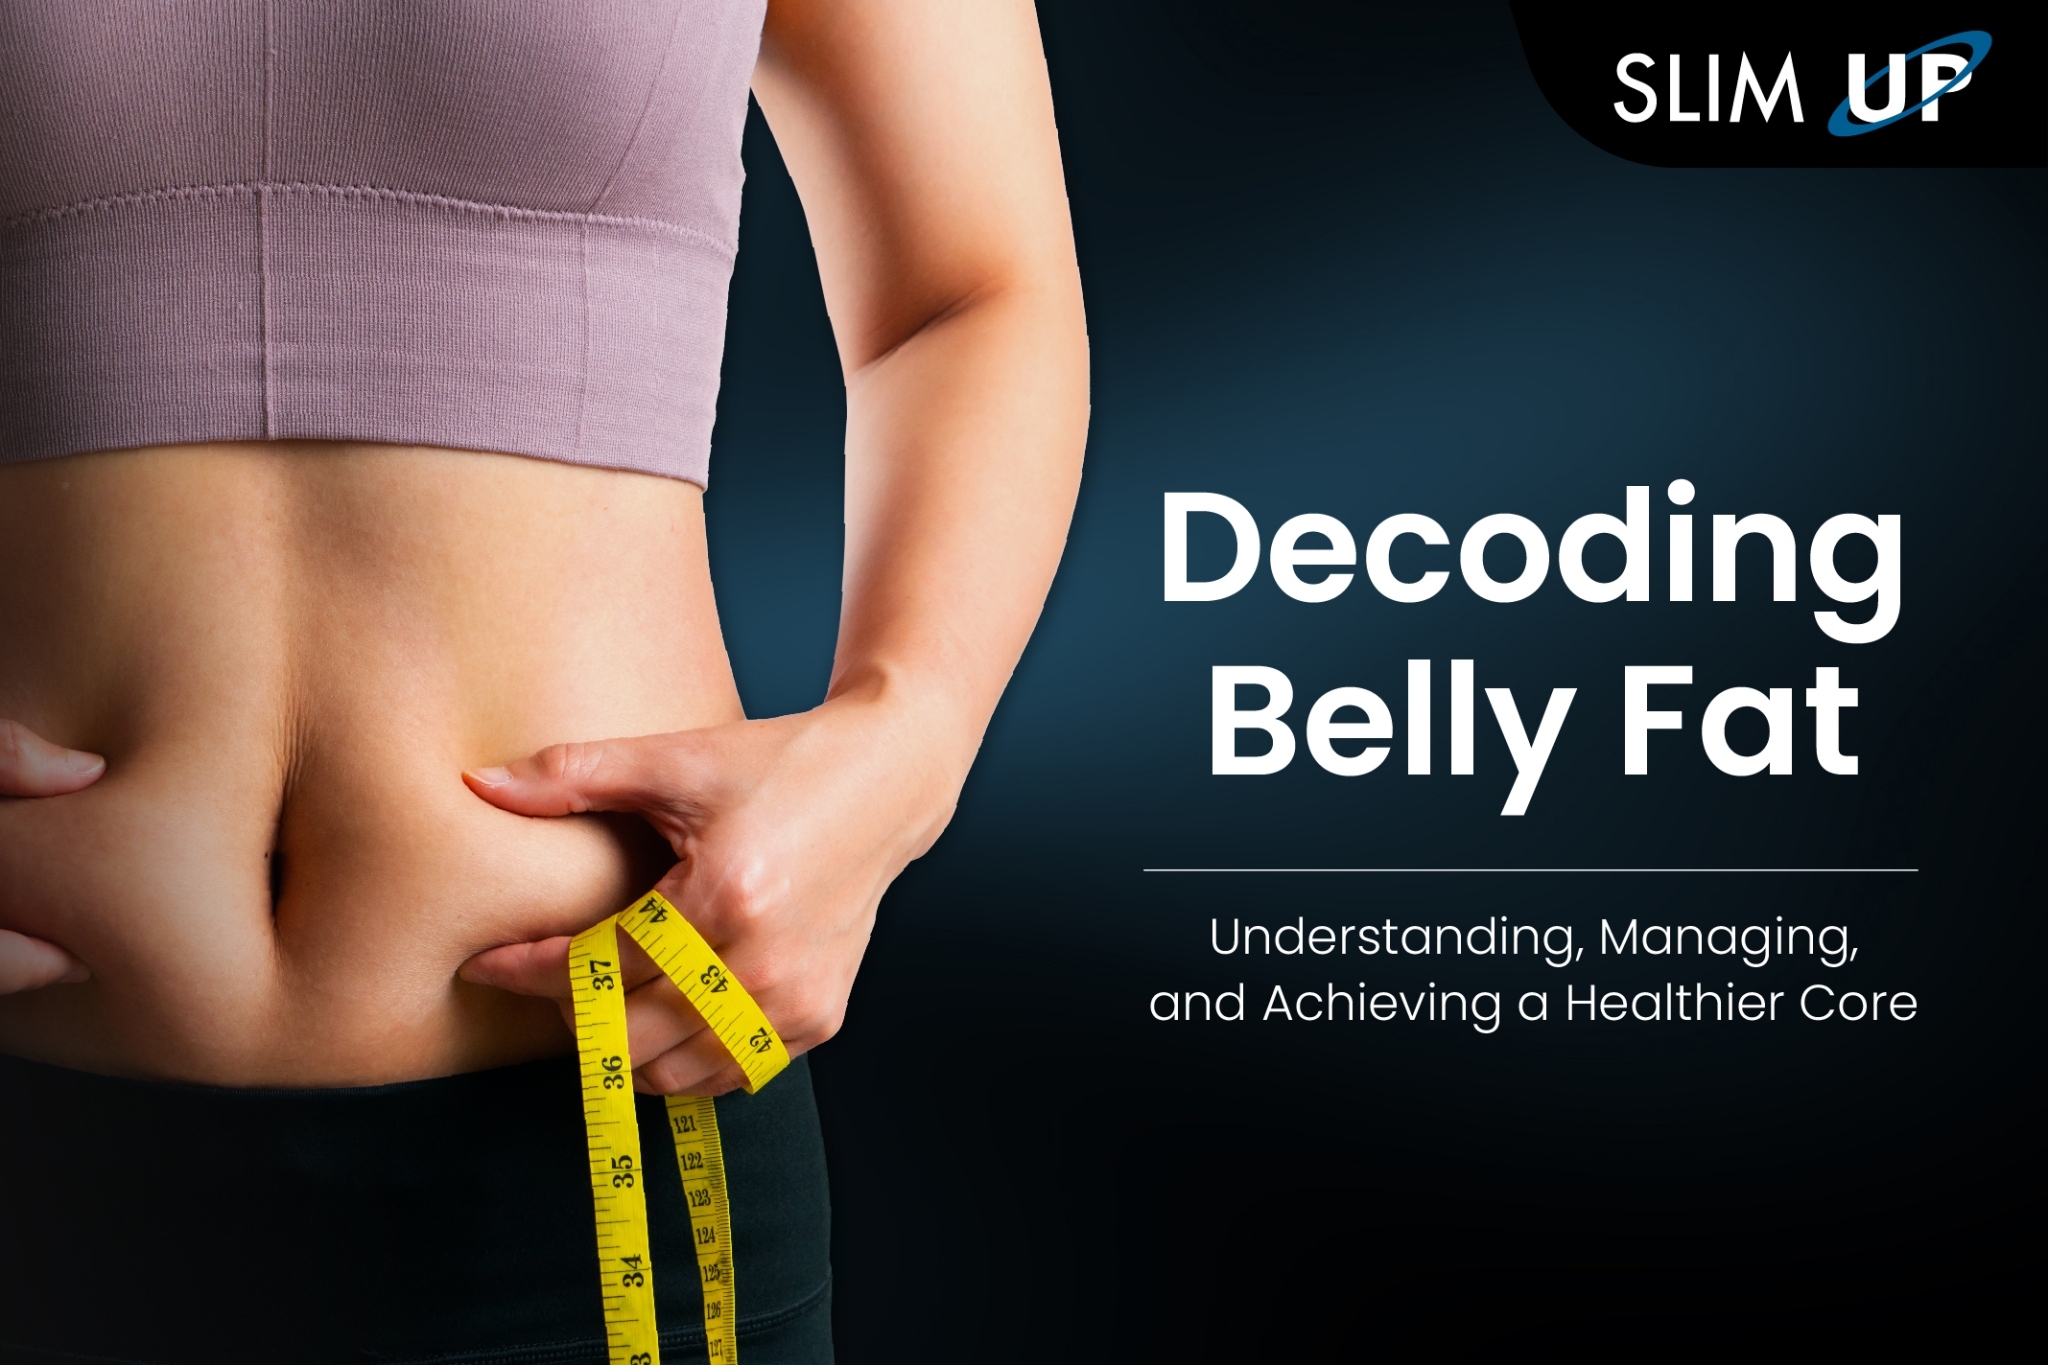 Decoding Belly Fat: Understanding, Managing, and Achieving a Healthier Core